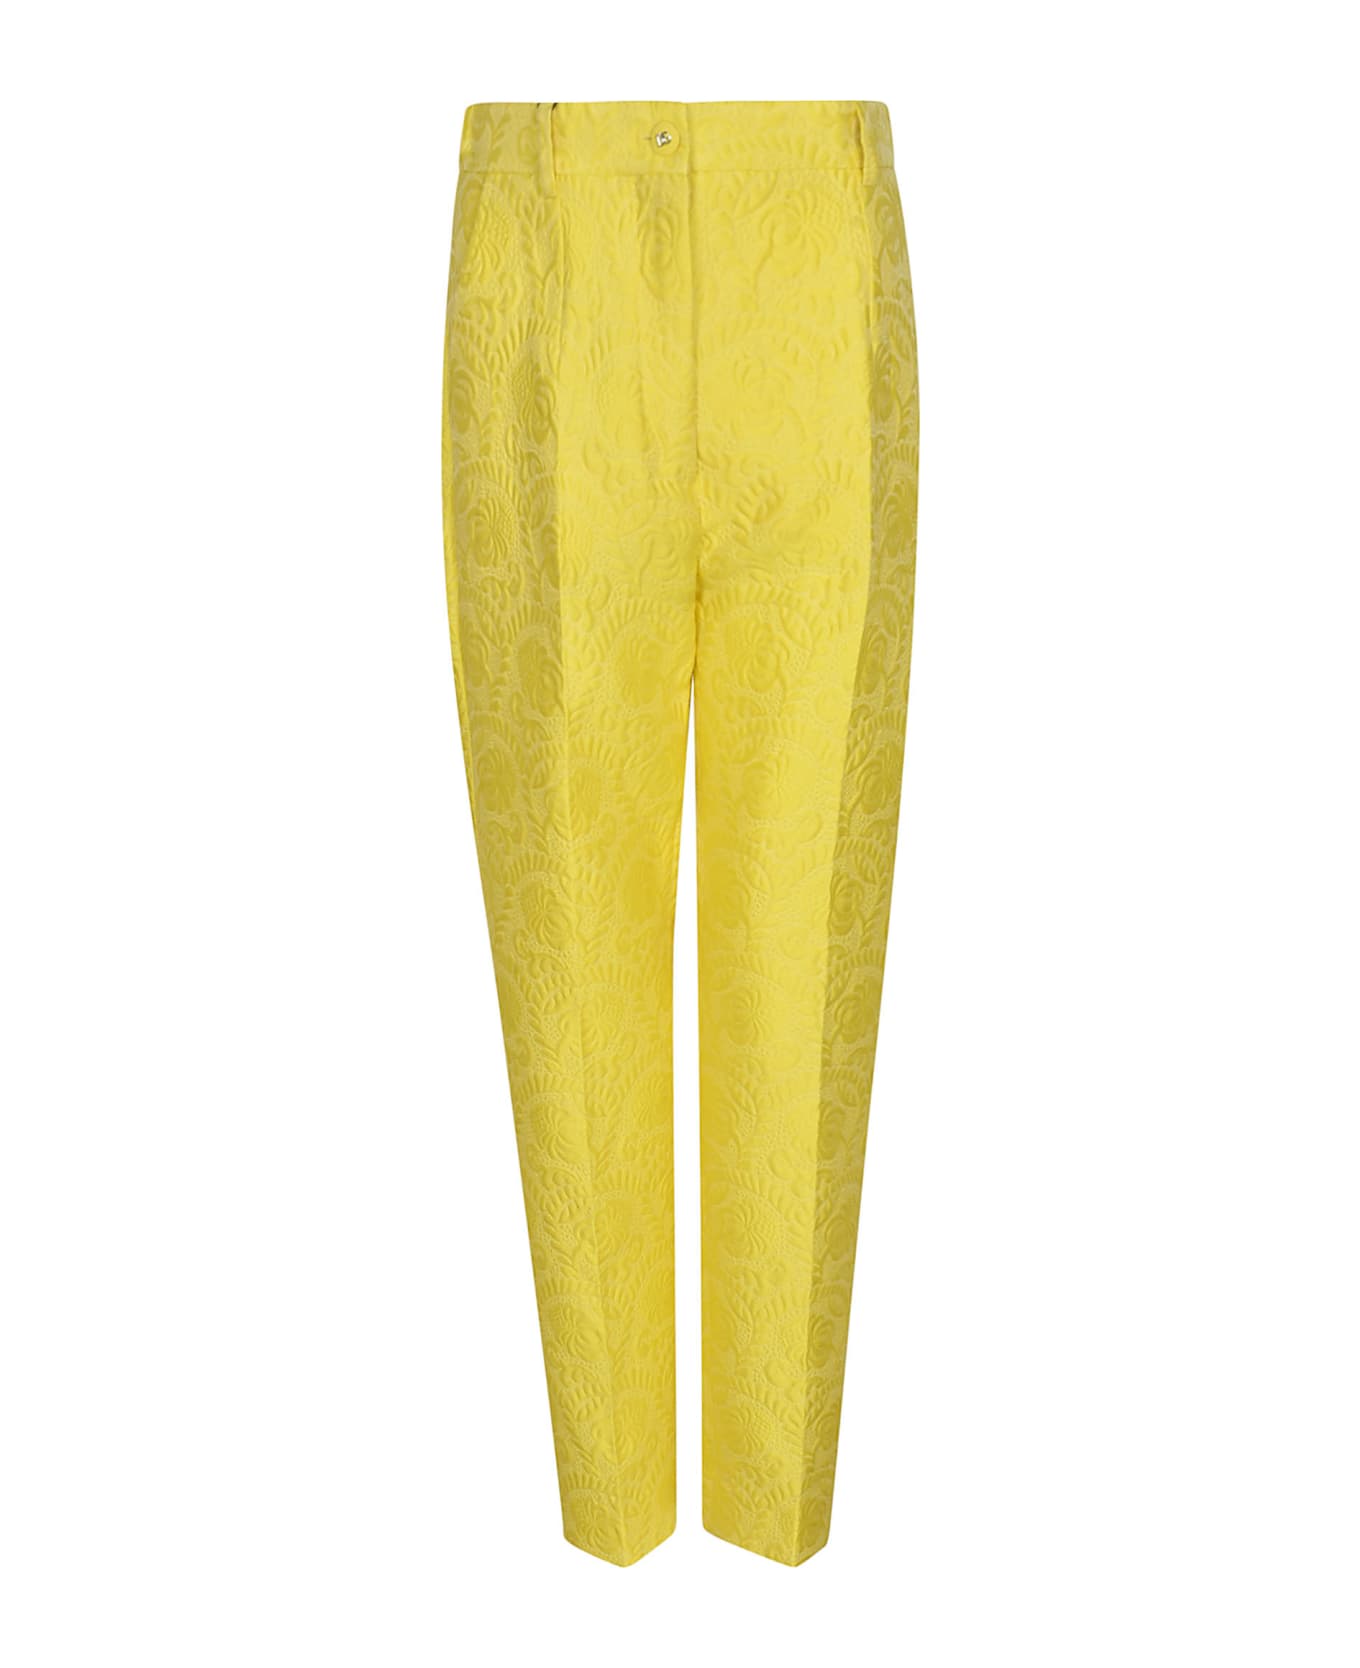 Dolce & Gabbana Buttoned Classic Trousers - yellow